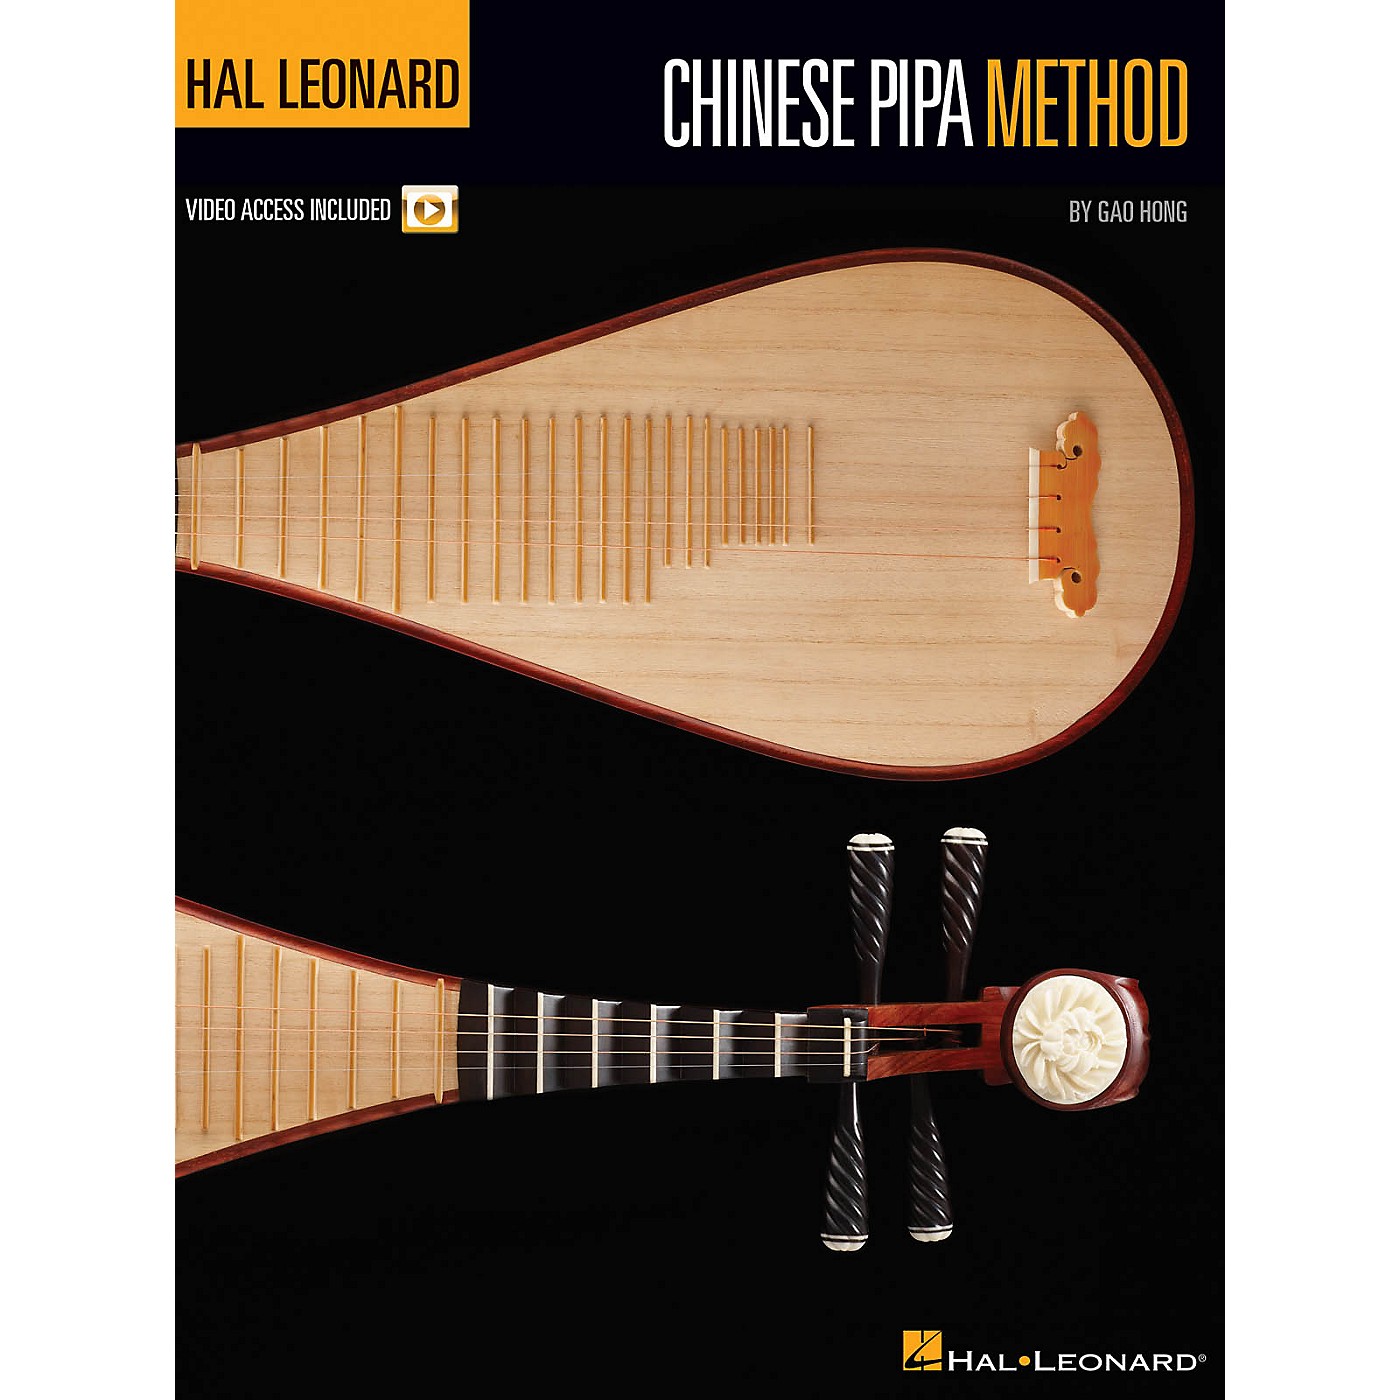 Hal Leonard Hal Leonard Chinese Pipa Method Pipa Series Softcover Video Online Written by Gao Hong thumbnail